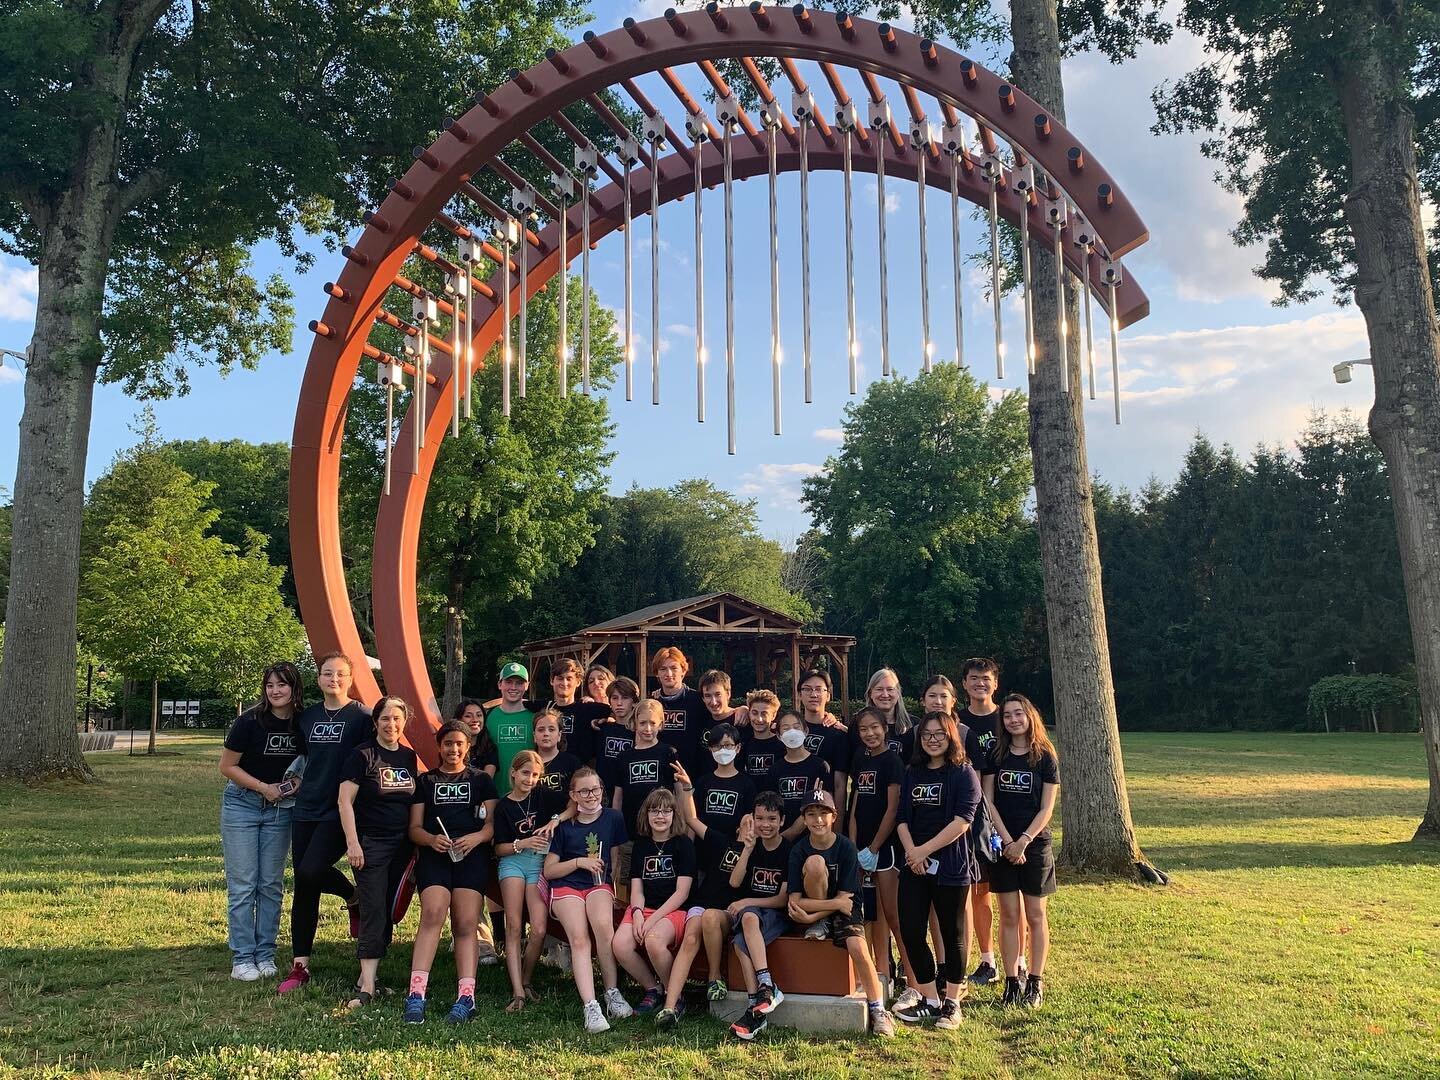 After being unable to perform live for the past few years, this season exploded with live performances around NY. 

Our students at CMC Summer took a trip this past Friday to the Caramoor Music Festival in Katonah, NY. We celebrated a fabulous first 